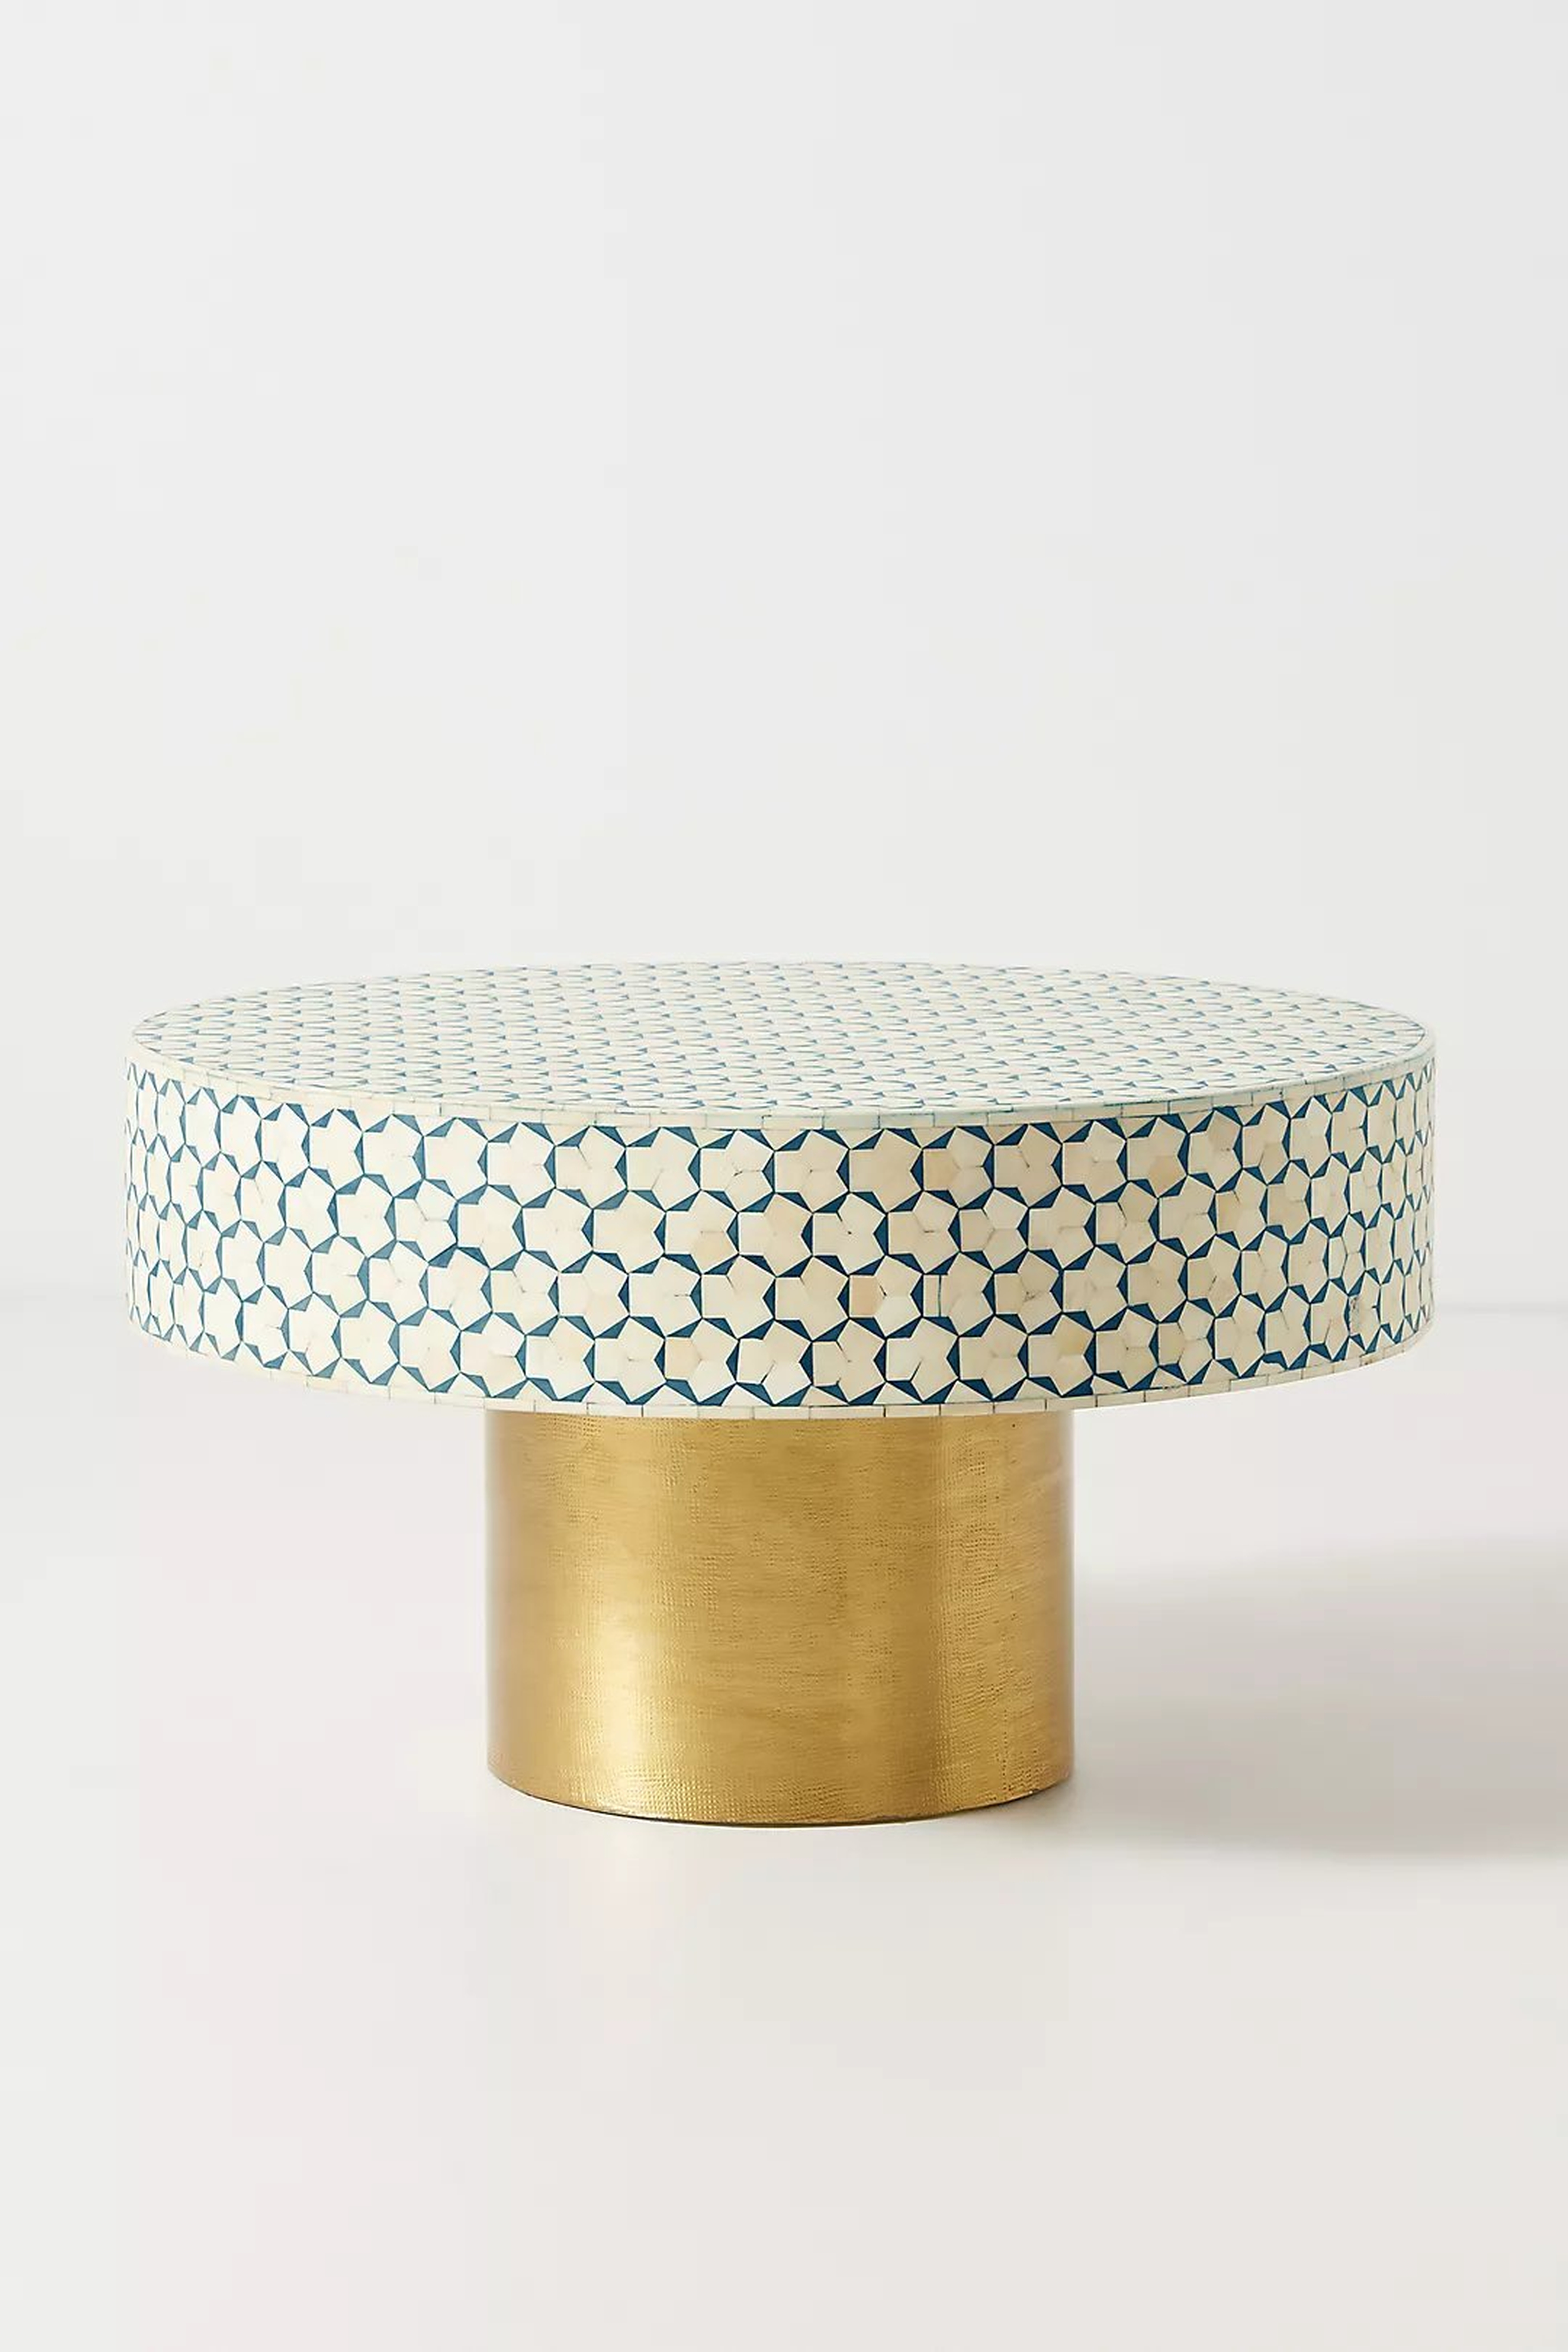 Targua Moroccan Coffee Table, Teal, 36" - Anthropologie